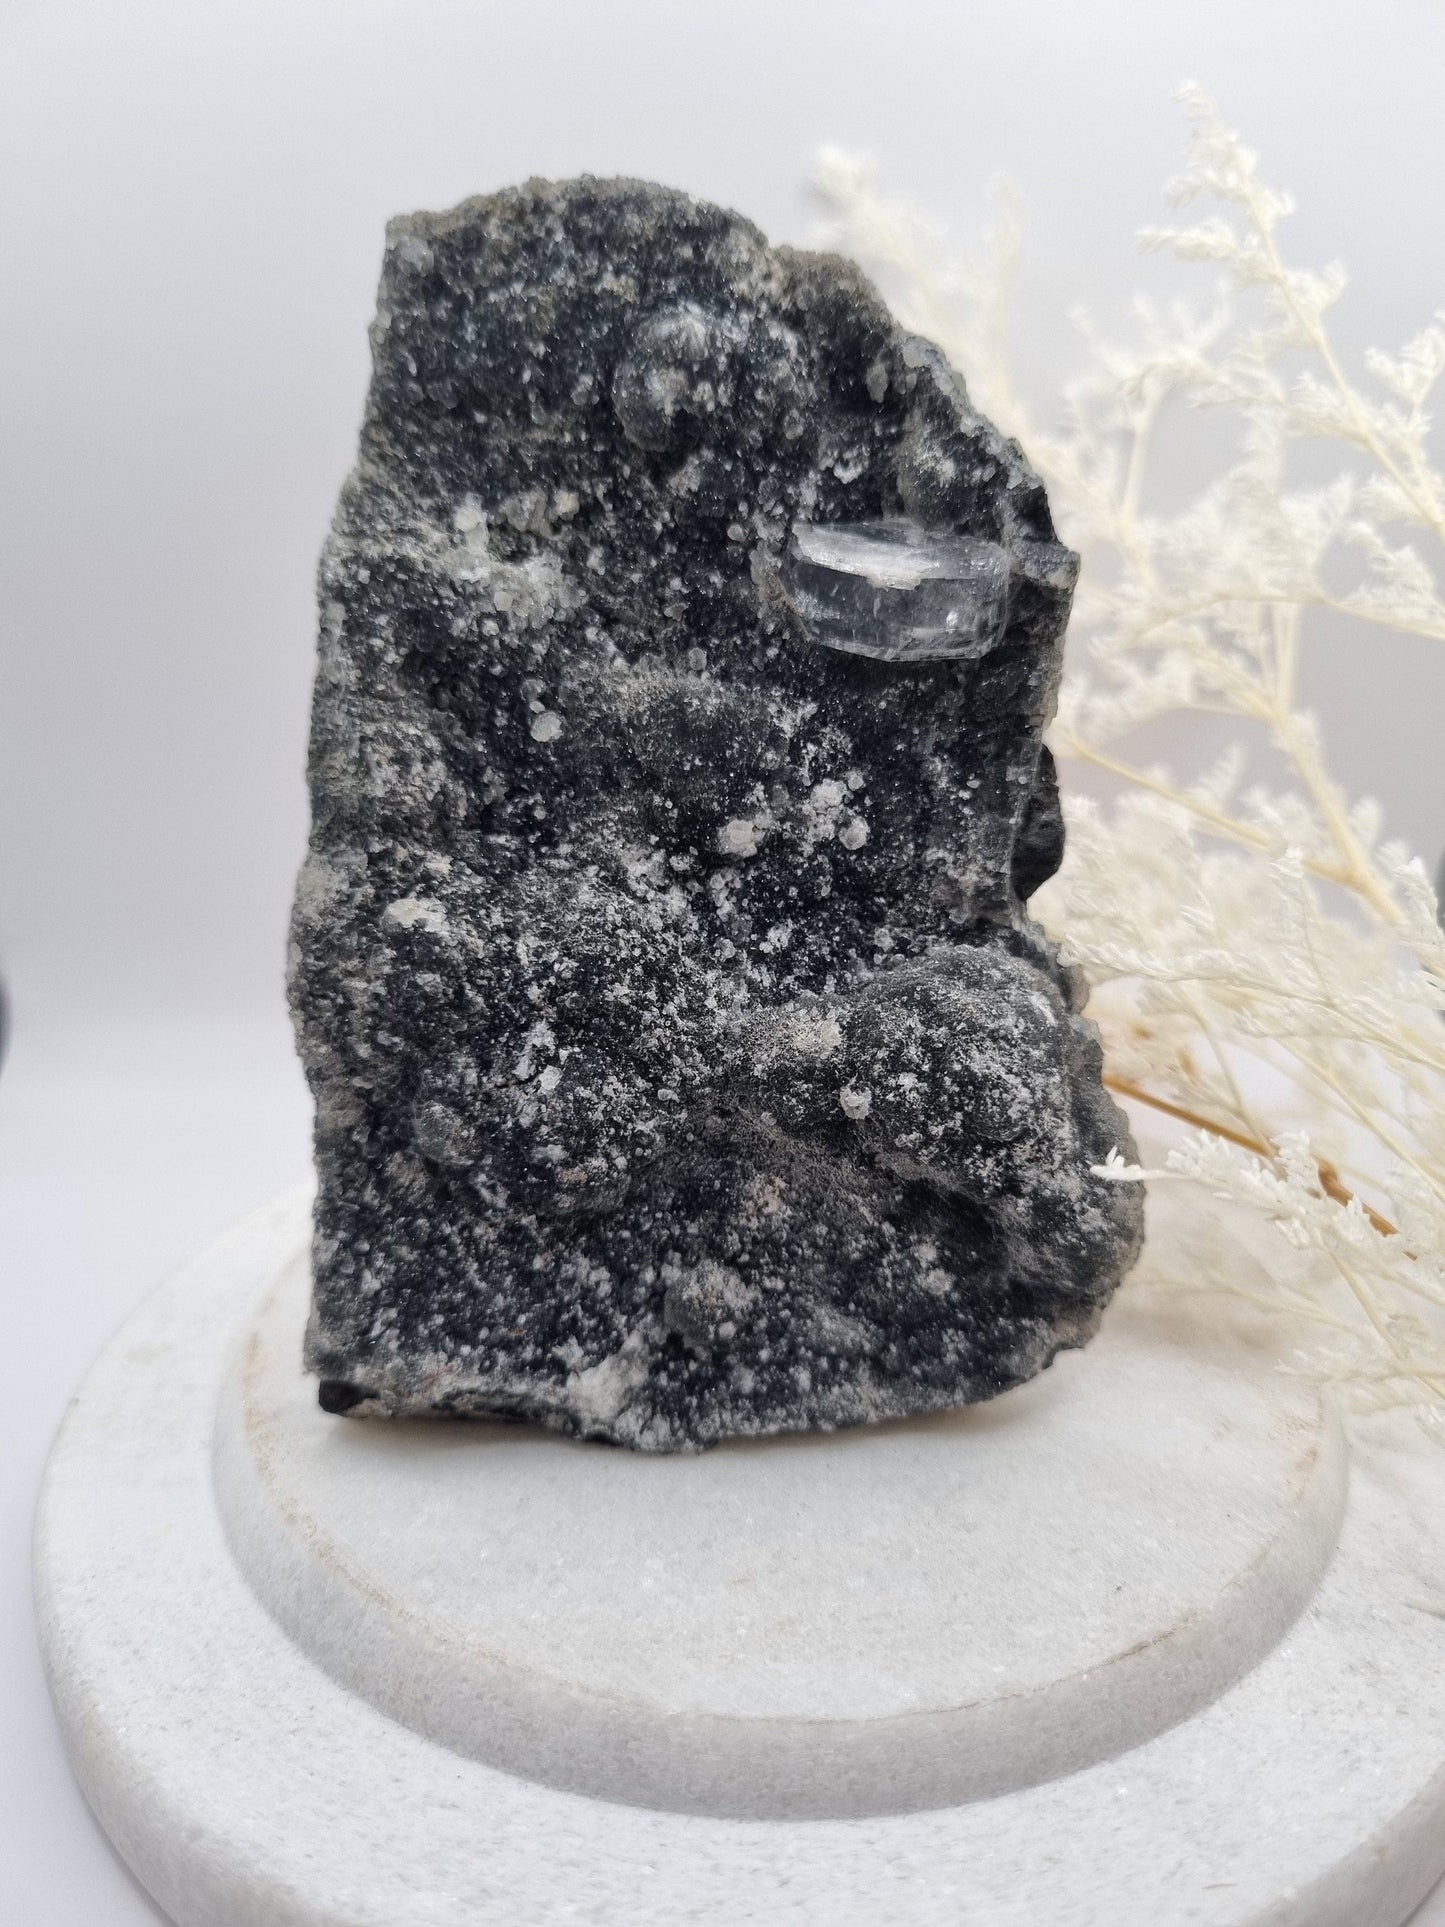 Stunning Black Amethyst With Sparkling Druzy And Apophyllite Inclusion - Universal Fate